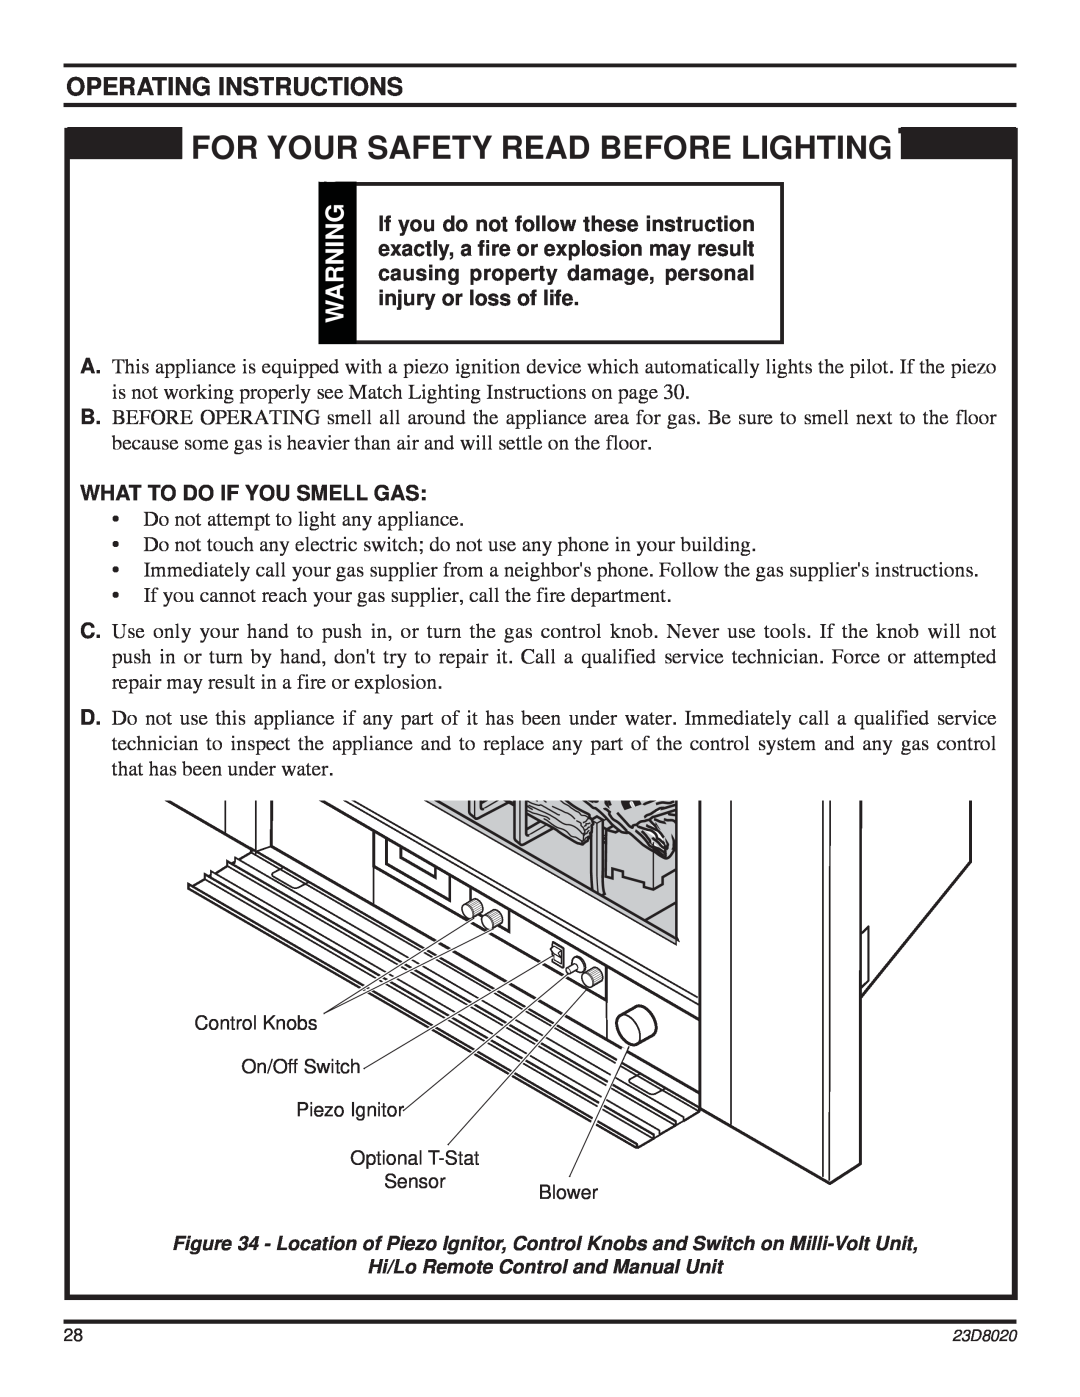 Monessen Hearth DIS33G manual For Your Safety Read Before Lighting, Operating Instructions, What To Do If You Smell Gas 